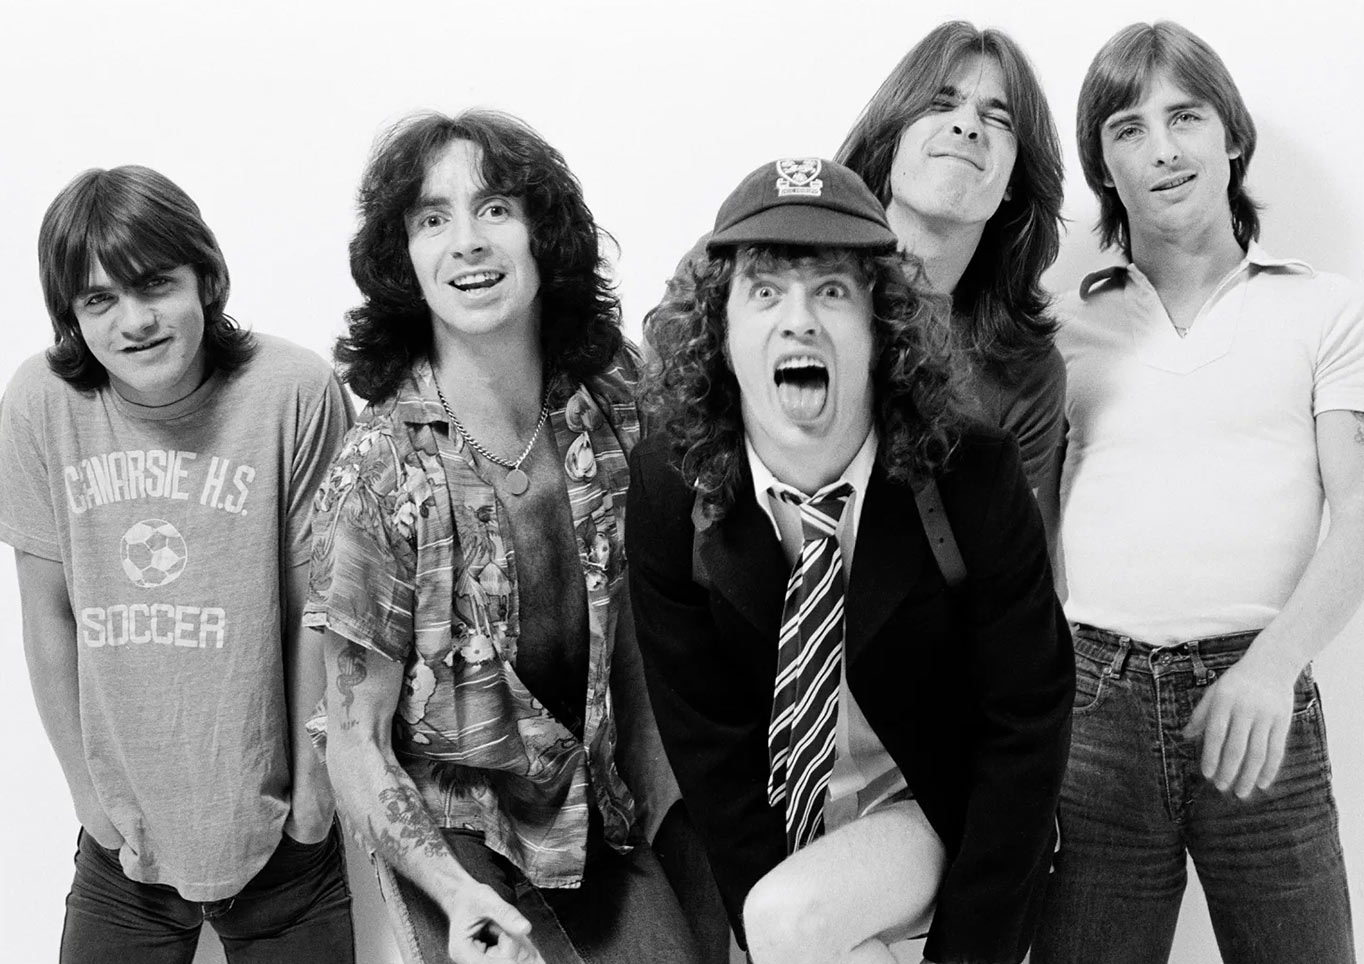 iconic Rock n' Roll band, AC/DC